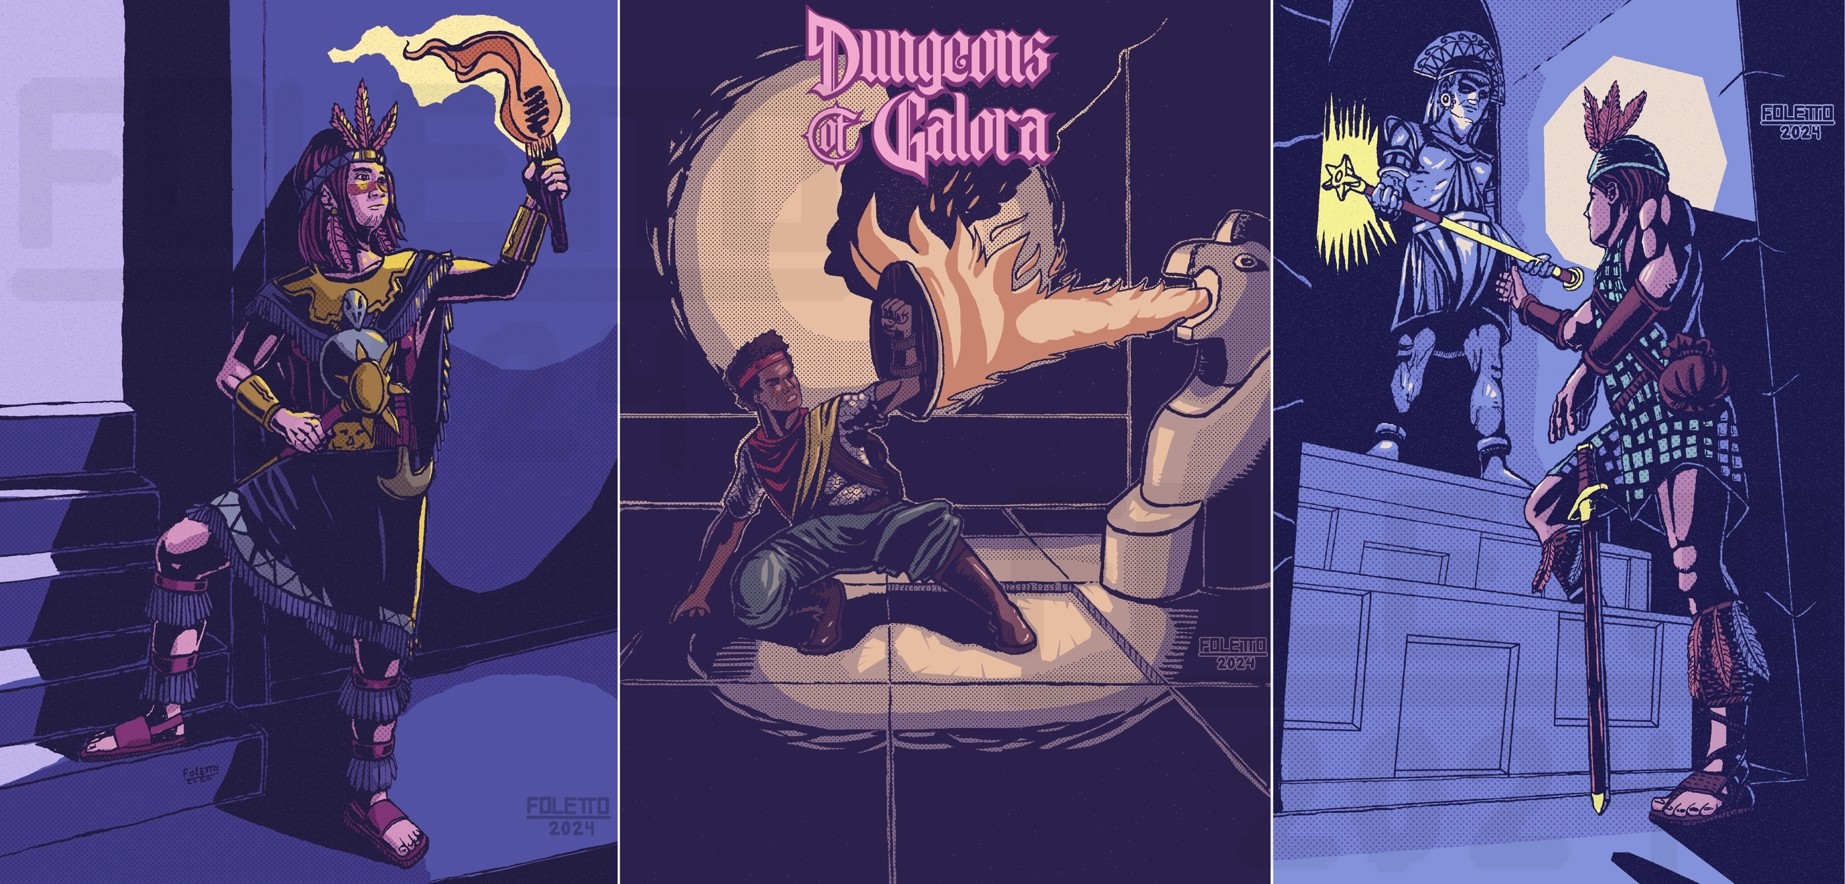 three images under the logo of DUNGEONS OF GALORA
the first image shows an adventurer walking down stairs, holding a torch on one hand and a scepter in the other.
The second shows an adventurer crouching and raising his shield to avoid a flamethrower trap on the wall.
the last image shows an adventurer walking up a dais while dropping his sword, reaching a magical scepter with his other hand.
